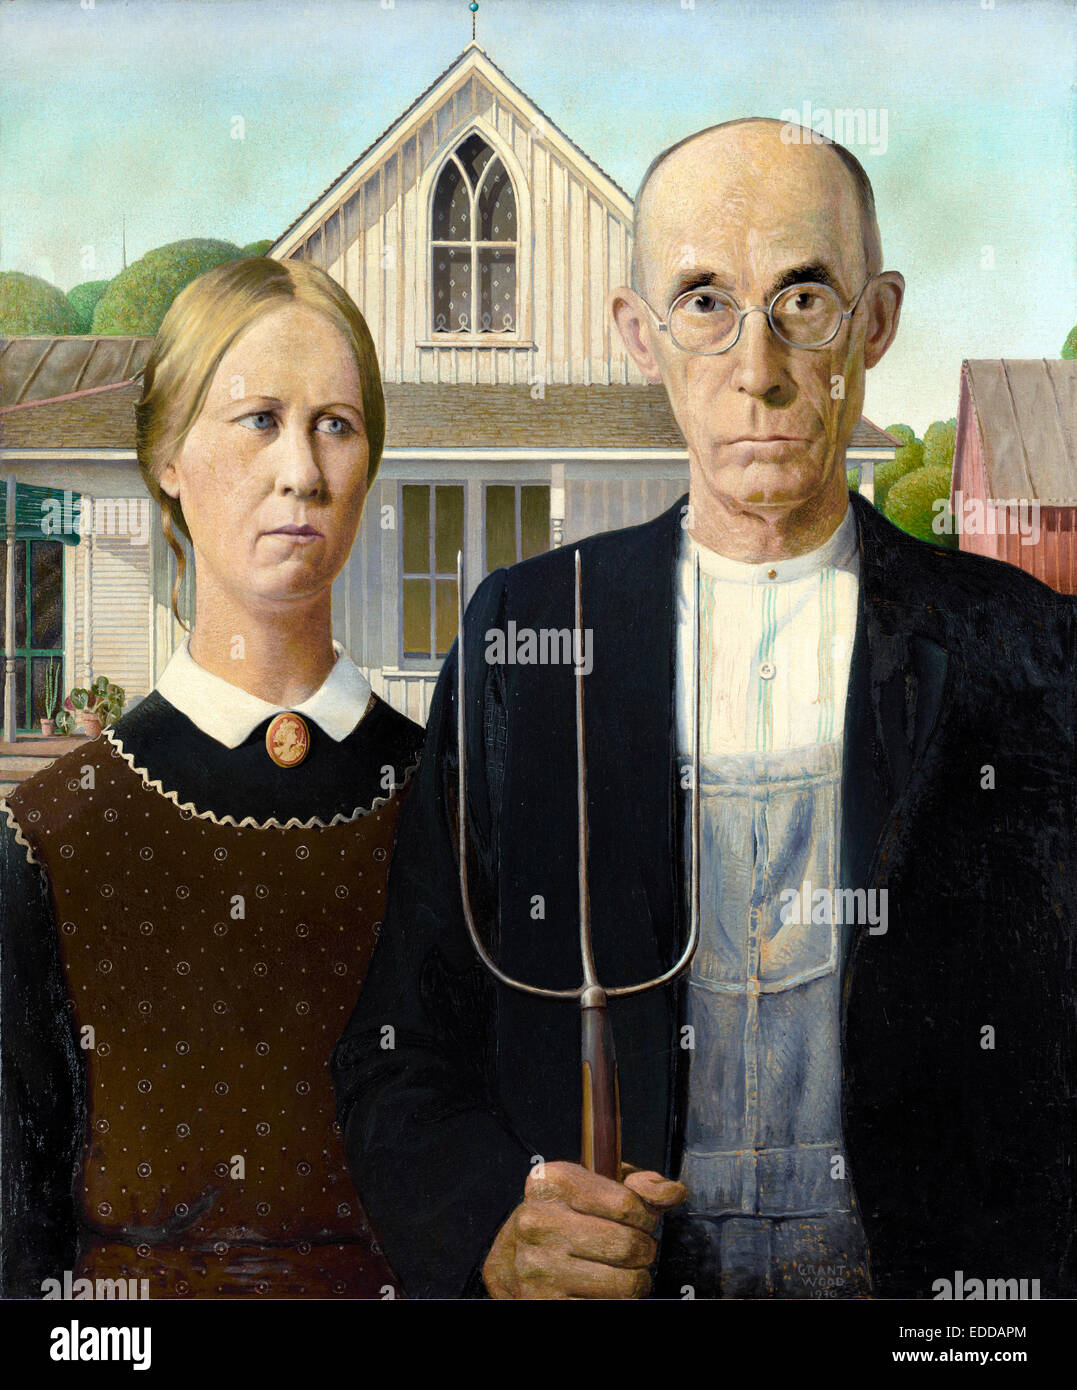 Grant Wood, American Gothic 1930 Oil on board. Art Institute of Chicago, USA. Stock Photo